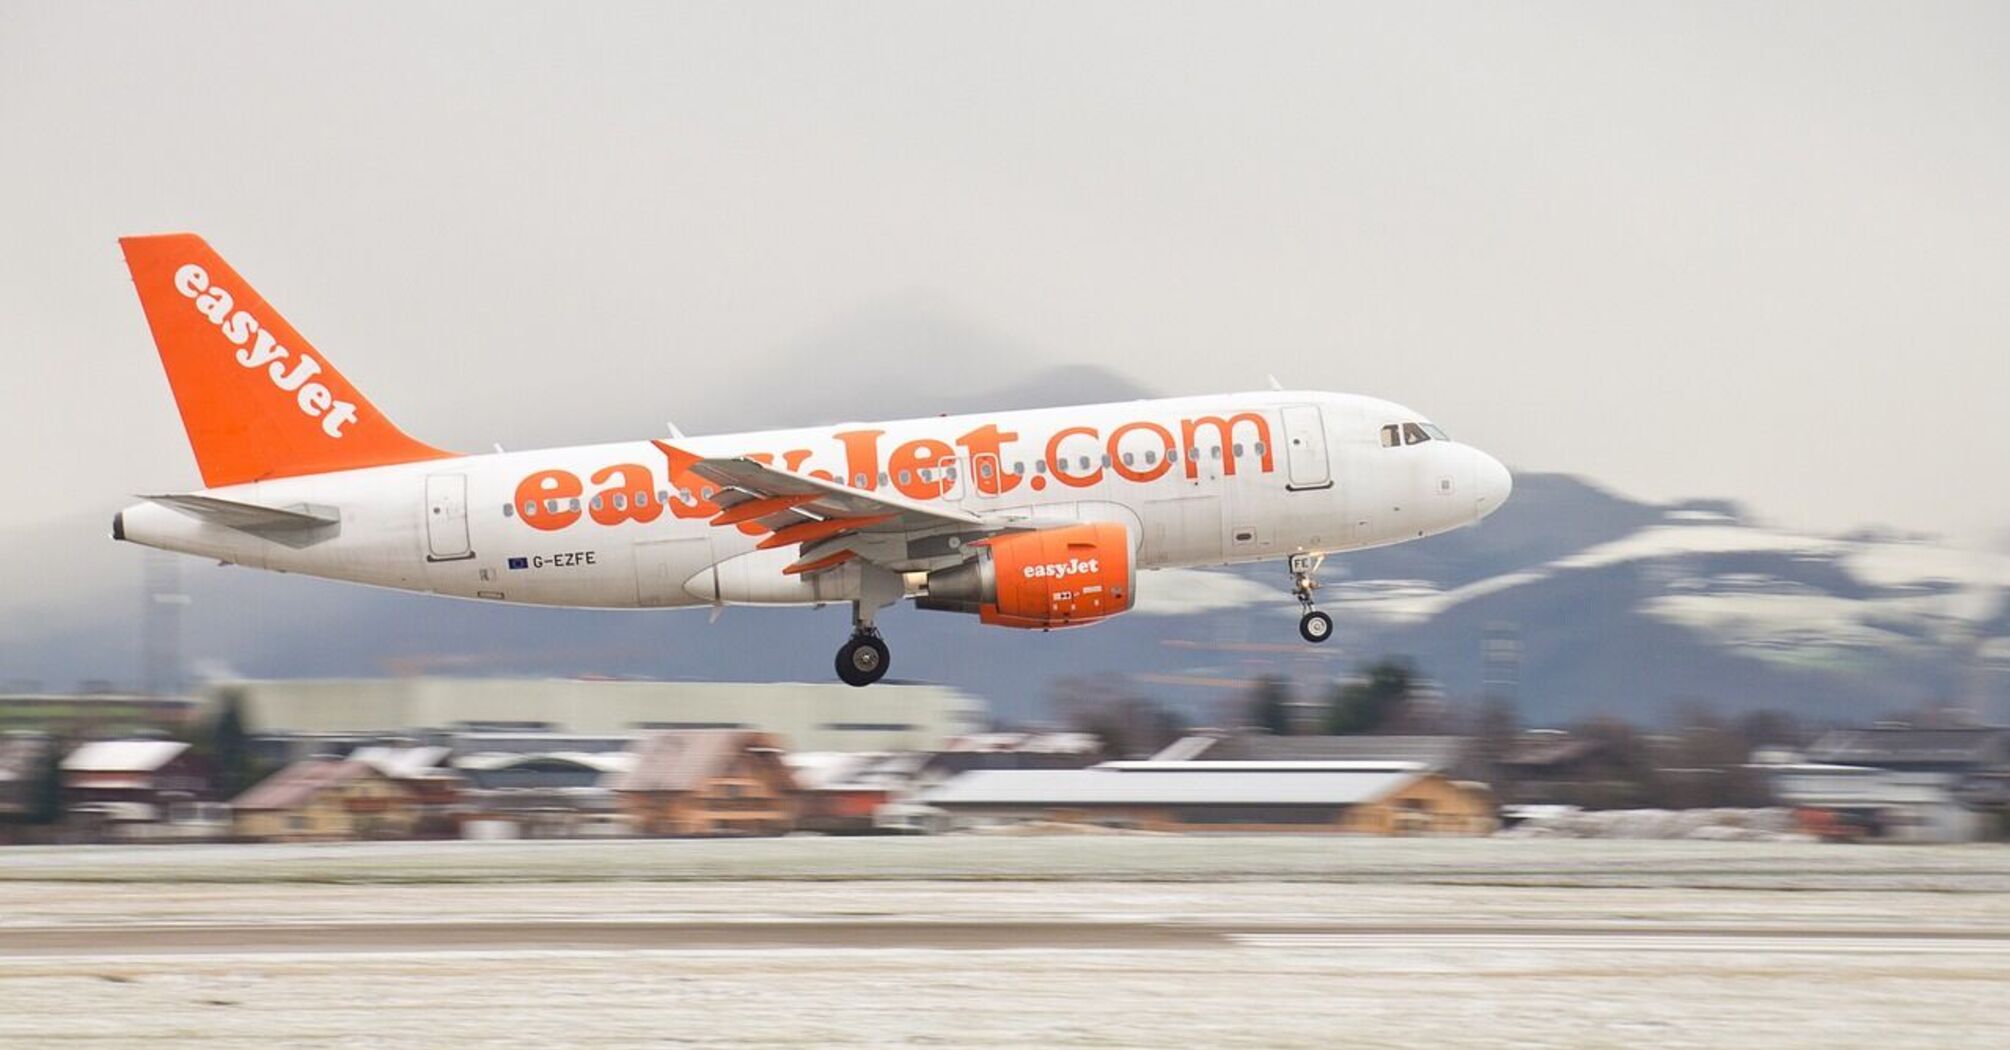 Discount up to £250: beach getaway with new advantageous offers from EasyJet